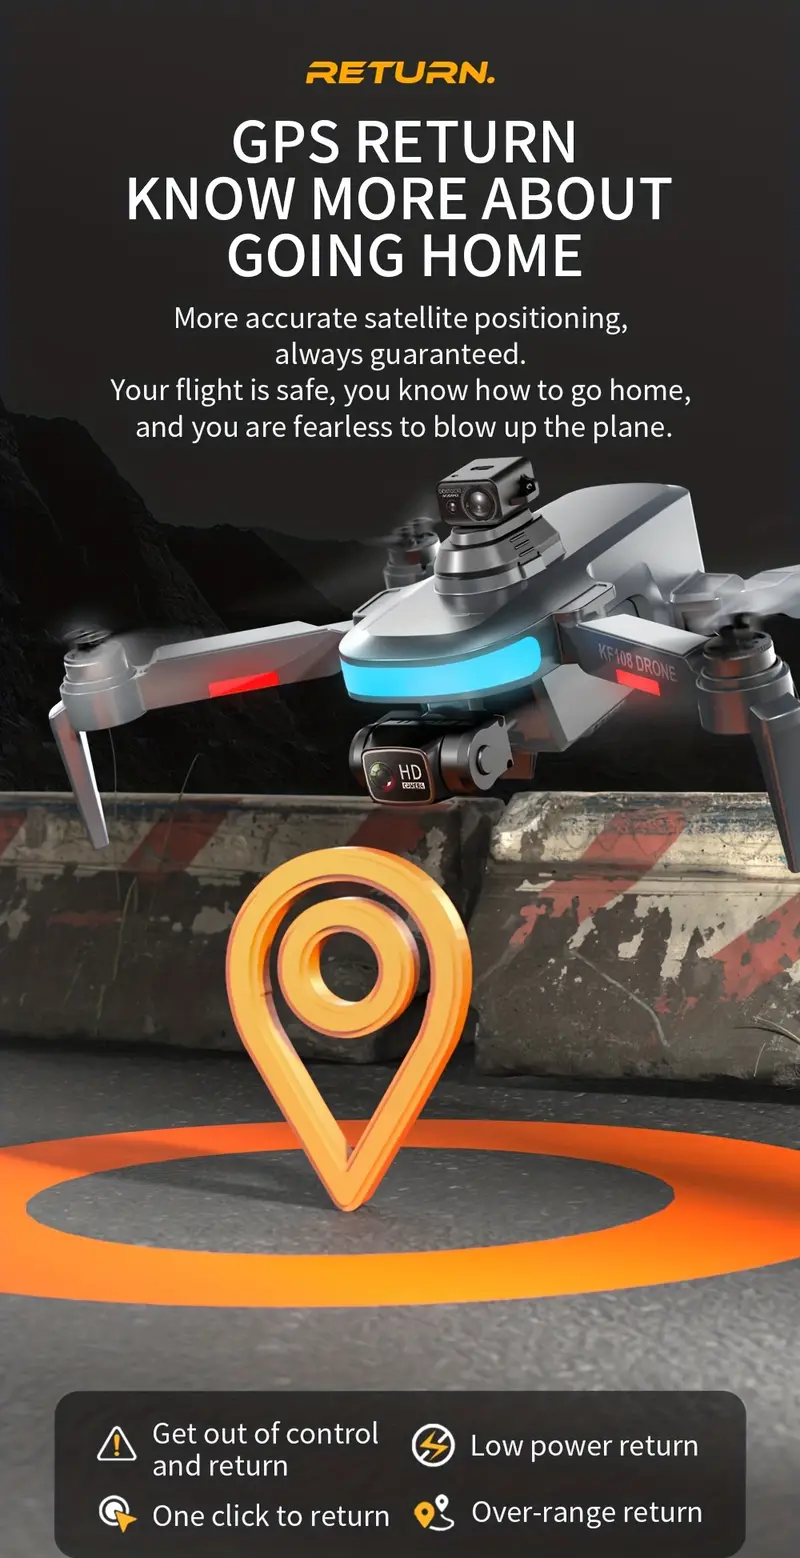 kf108 professional drone dual hd camera brushless motor gps optical flow positioning infrared laser obstacle avoidance aerial photography foldable uav quadcopter toy gift details 7